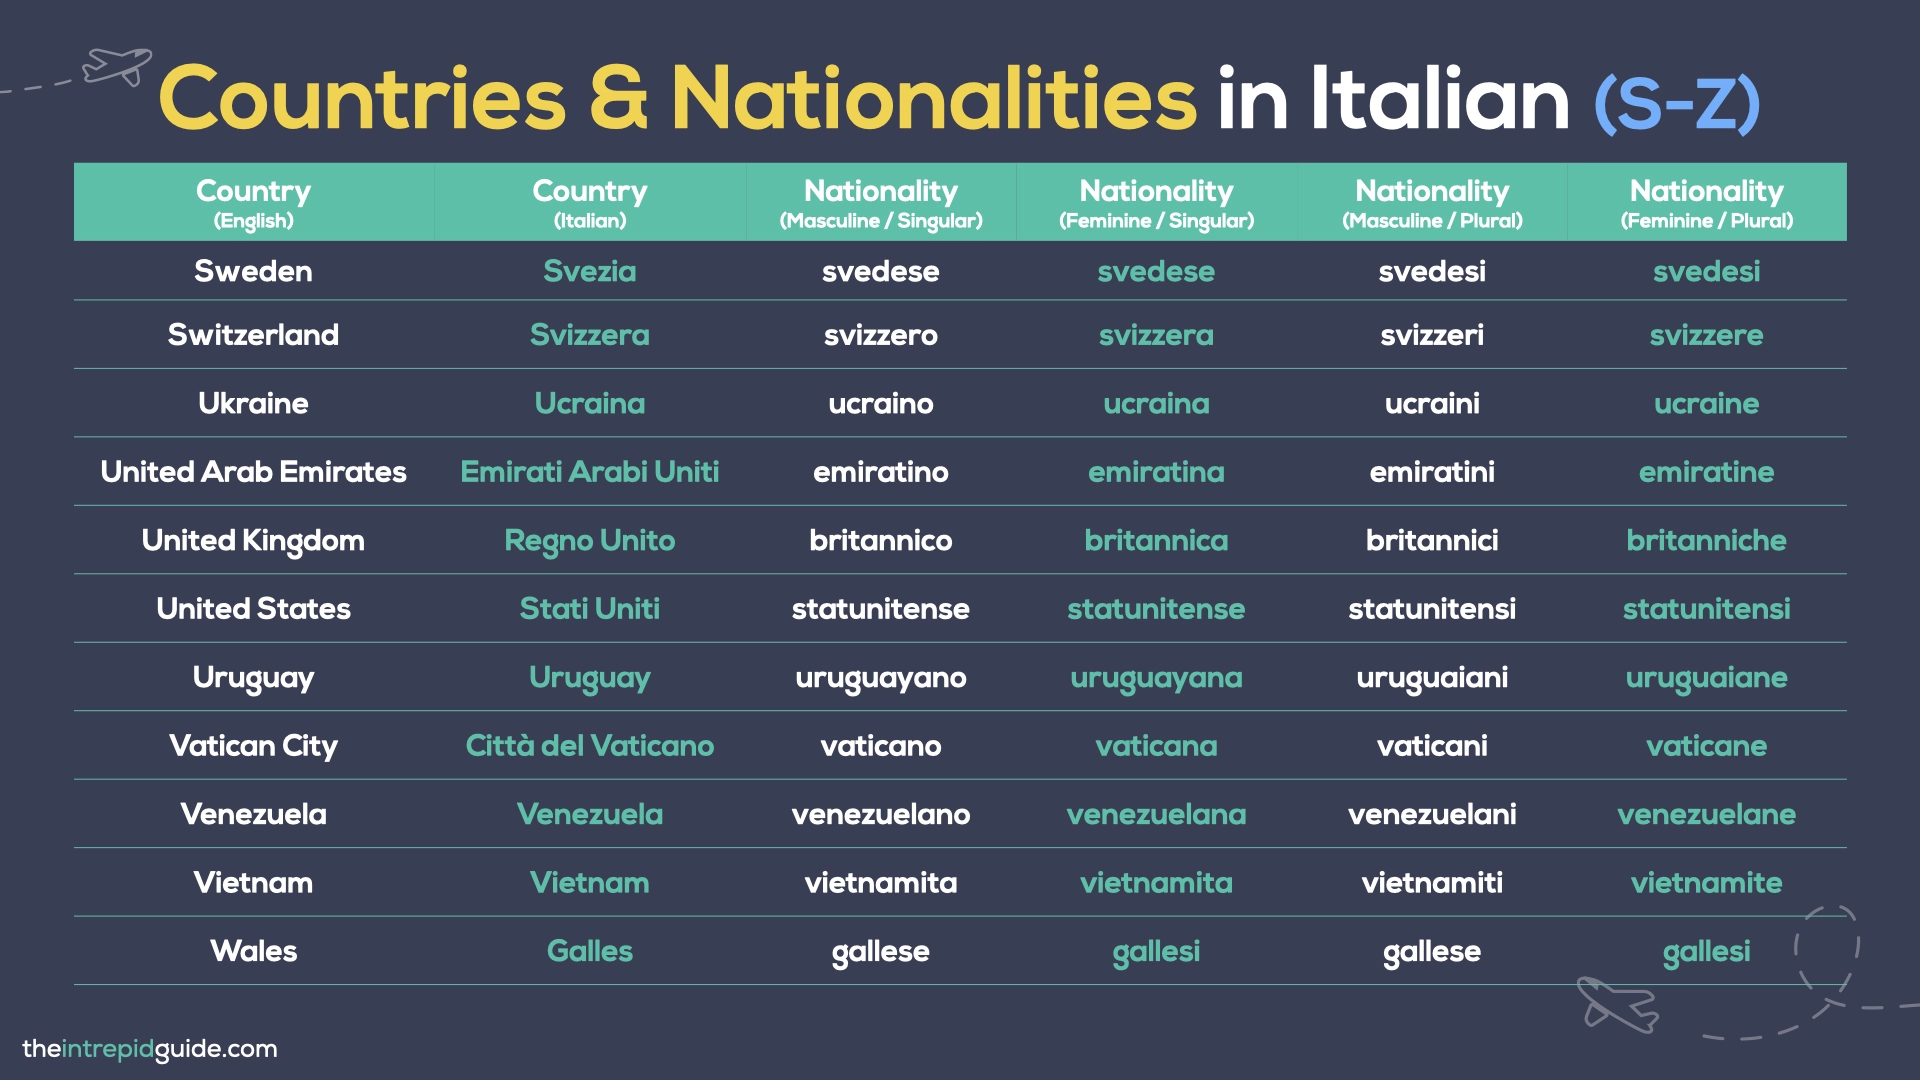 Countries and Nationalities in Italian - From S-Z